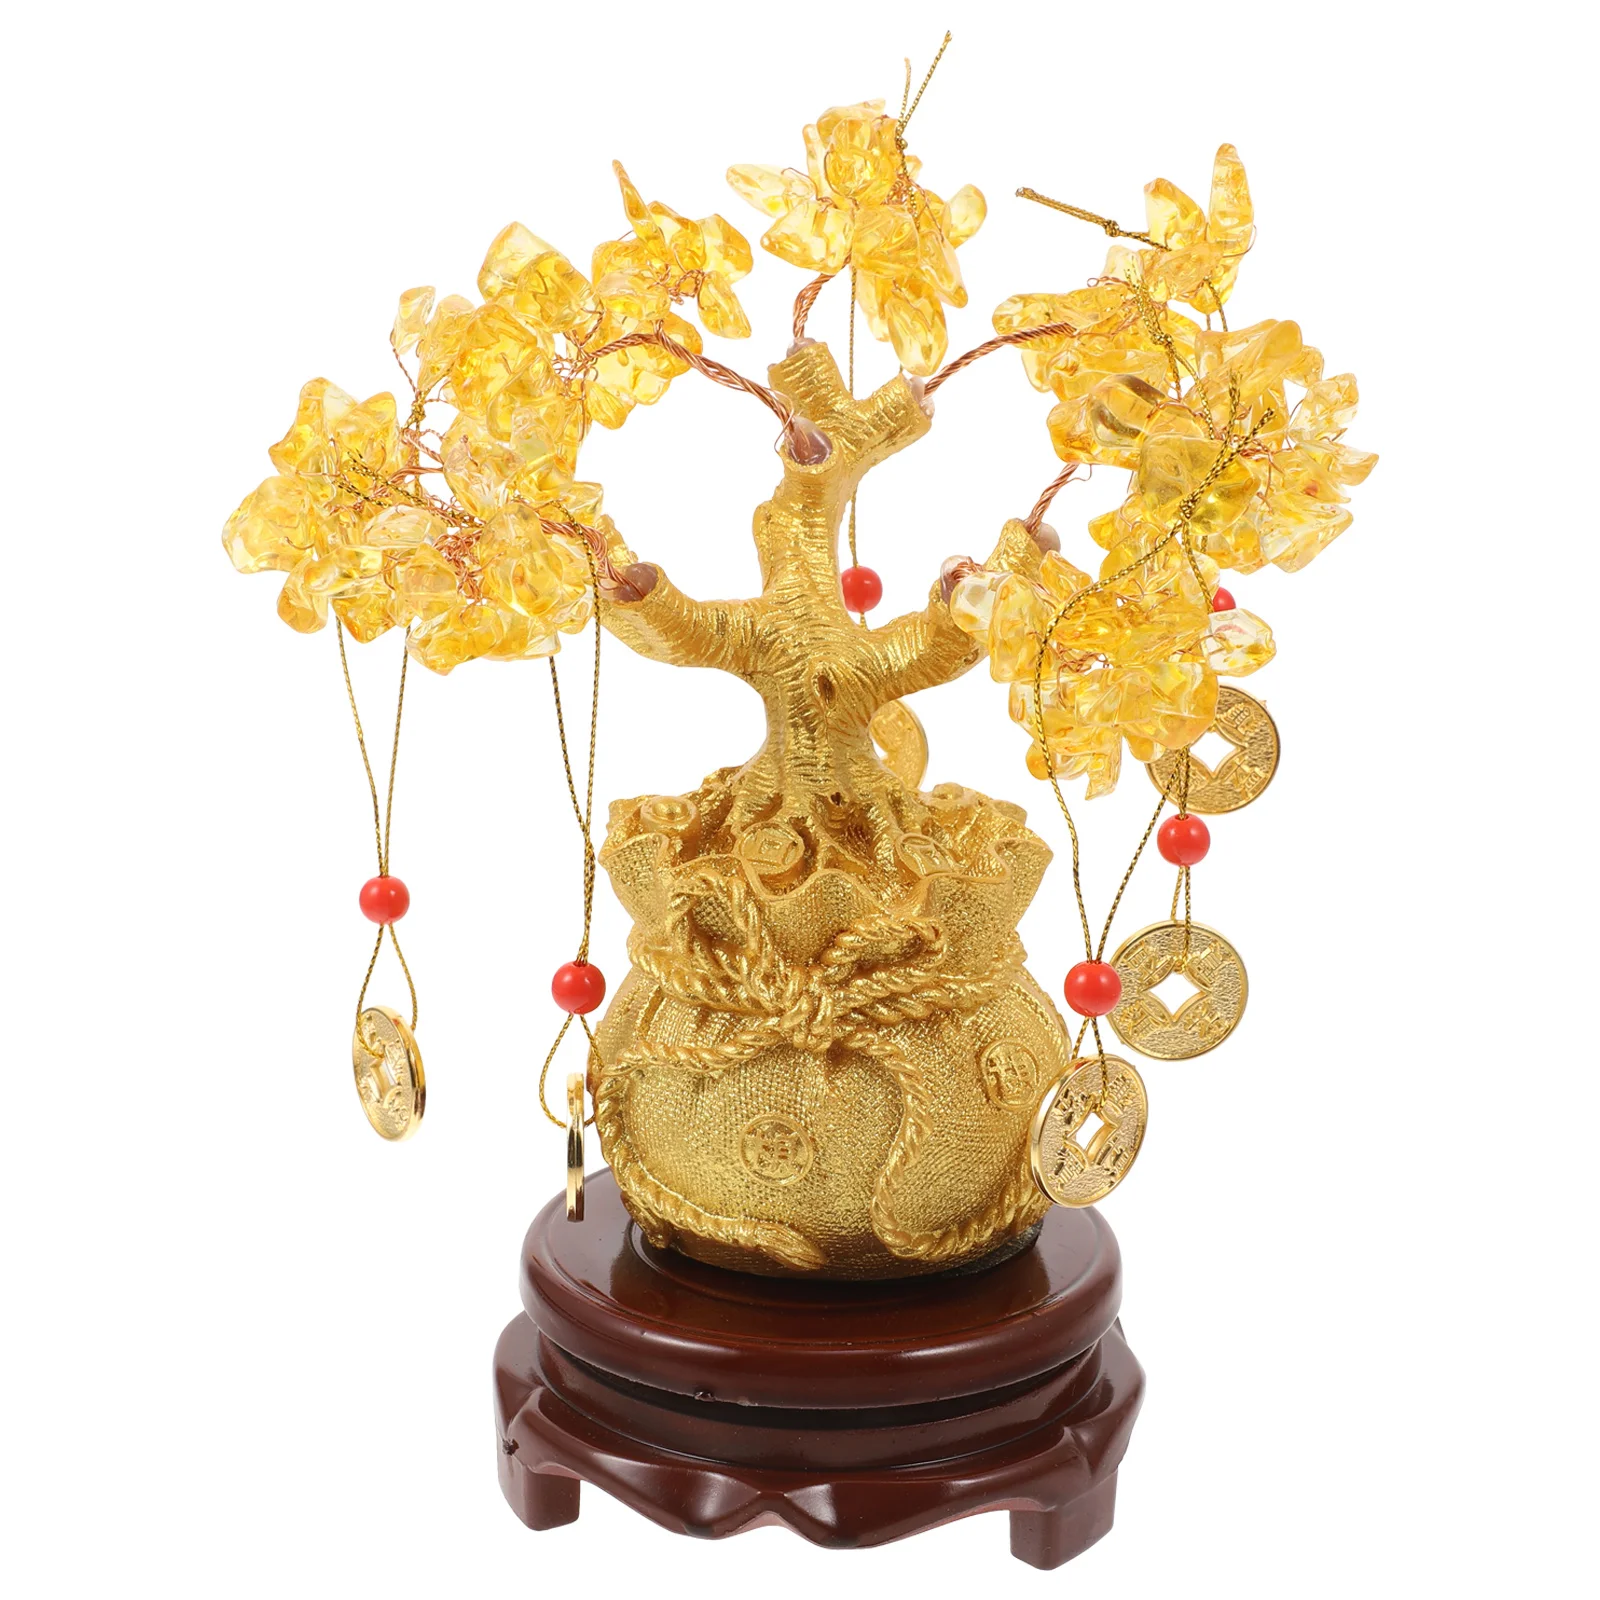 

19cm Natural Crystal Tree Money Tree Ornaments Bonsai Style Wealth Luck Feng Shui Ornaments Home Decor(with Gold Coins and Base)